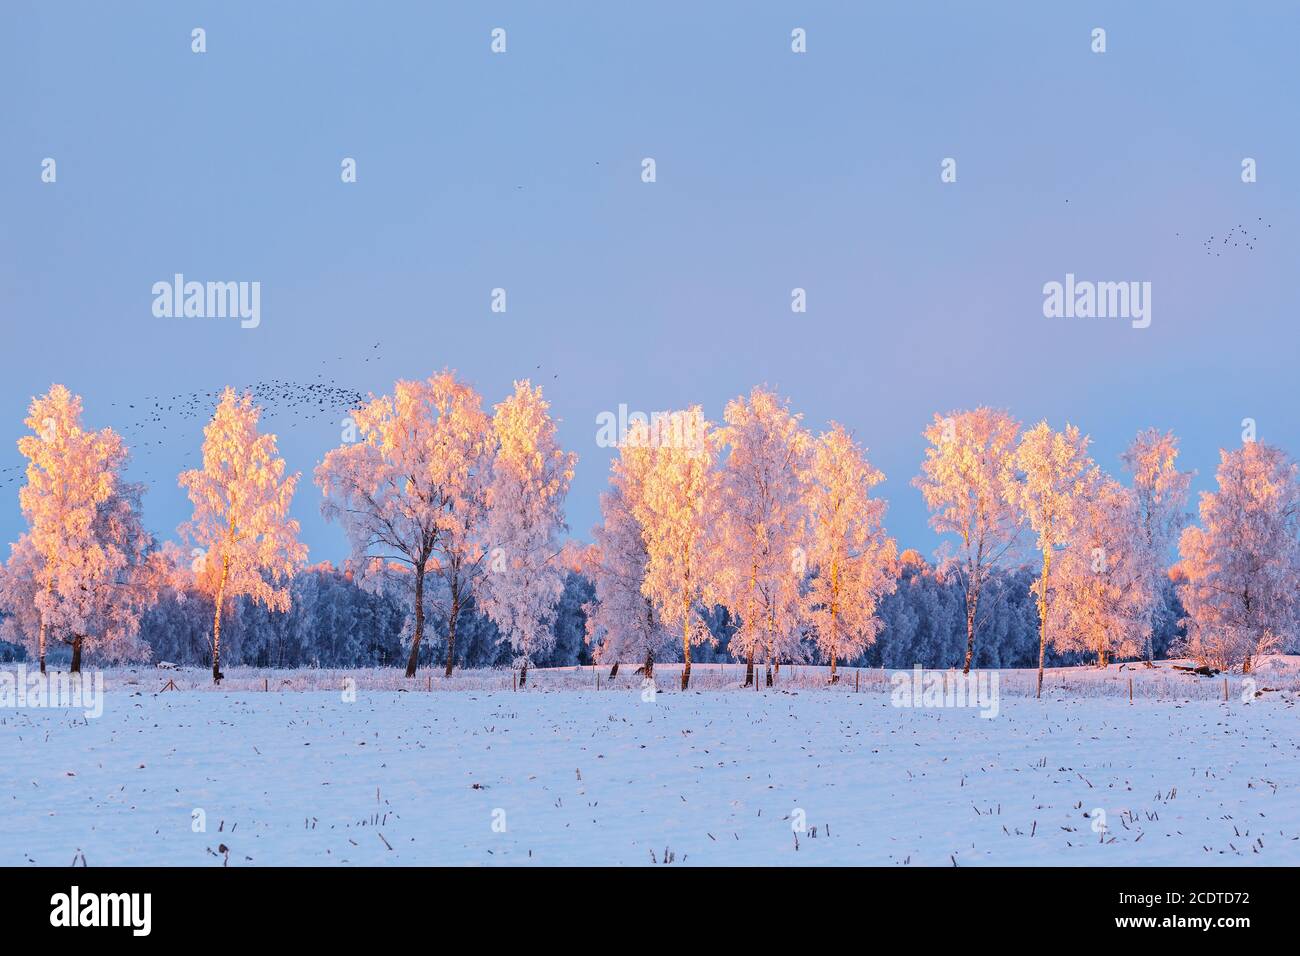 Frosty tree in a wintery landscape with a flock of birds Stock Photo